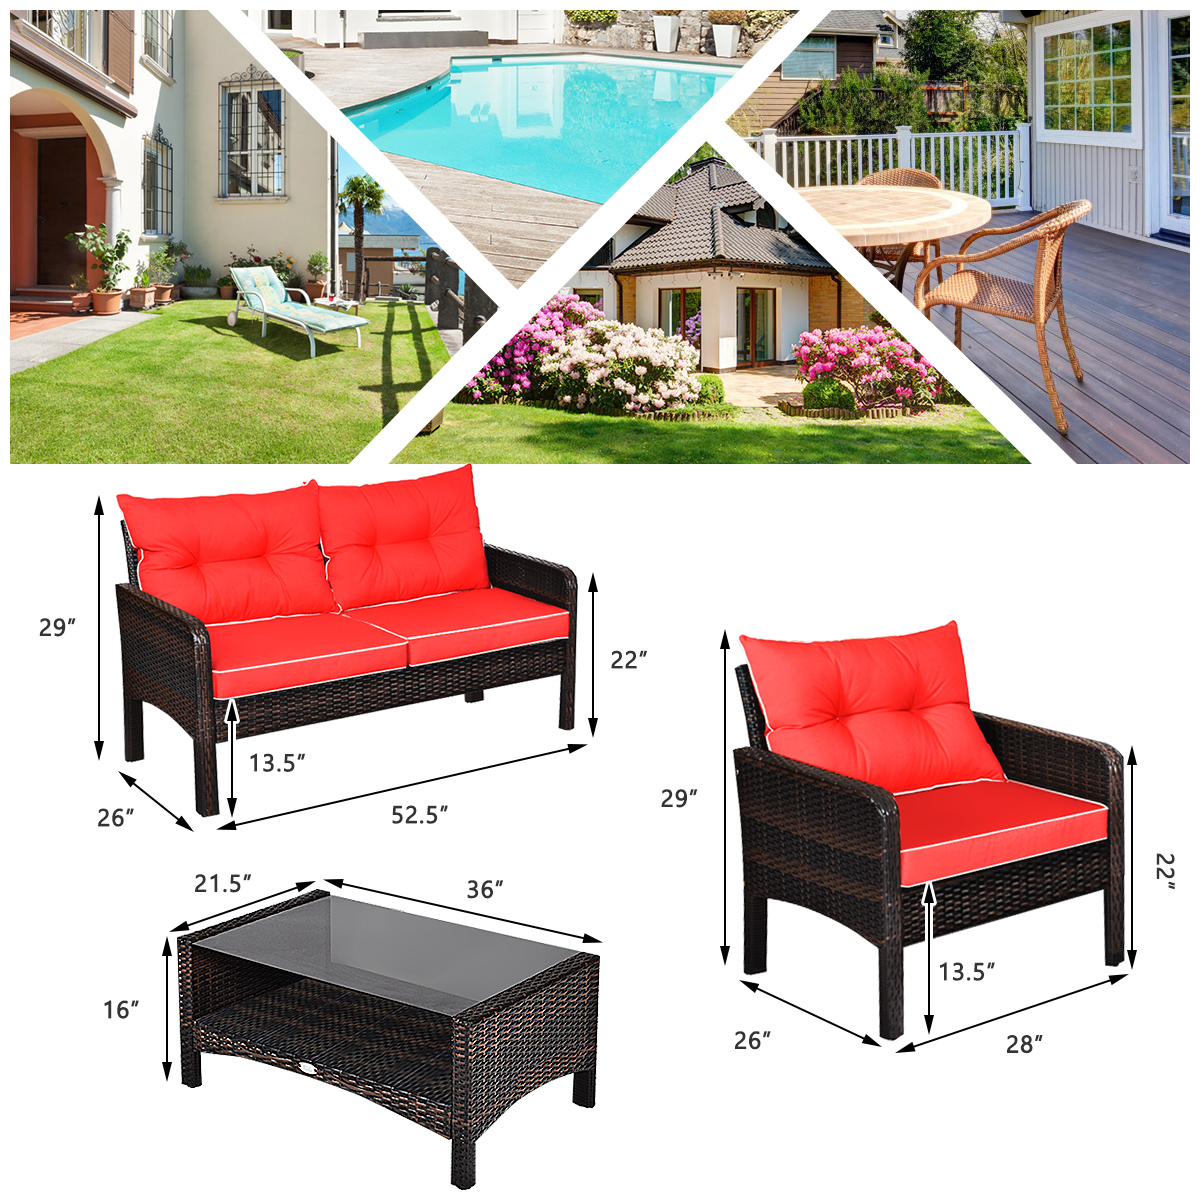 Gymax 4PCS Rattan Patio Conversation Set Red Cushioned Outdoor Furniture Set - image 5 of 9